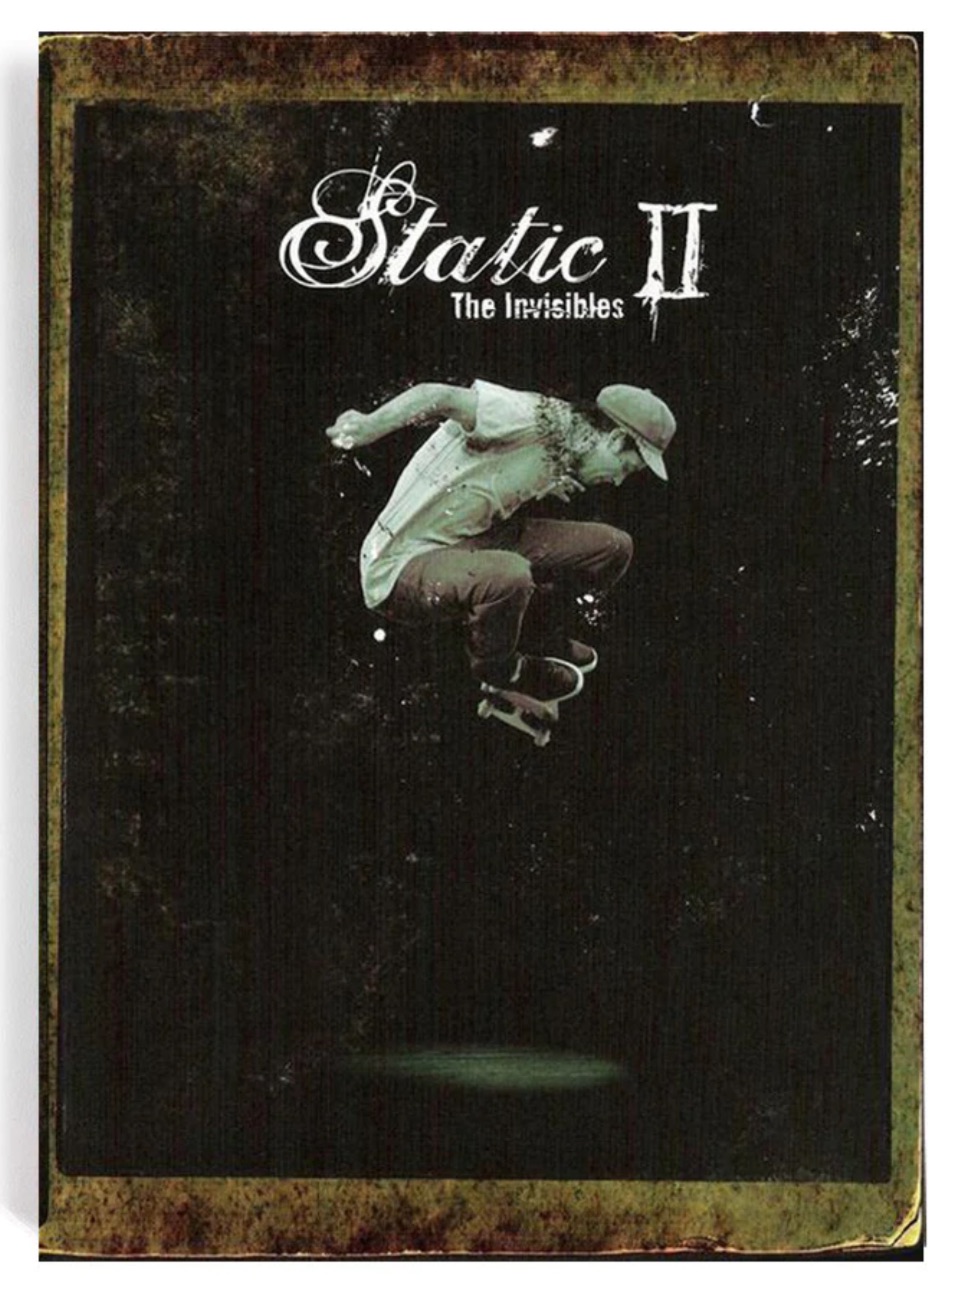 Static II: The Invisibles cover